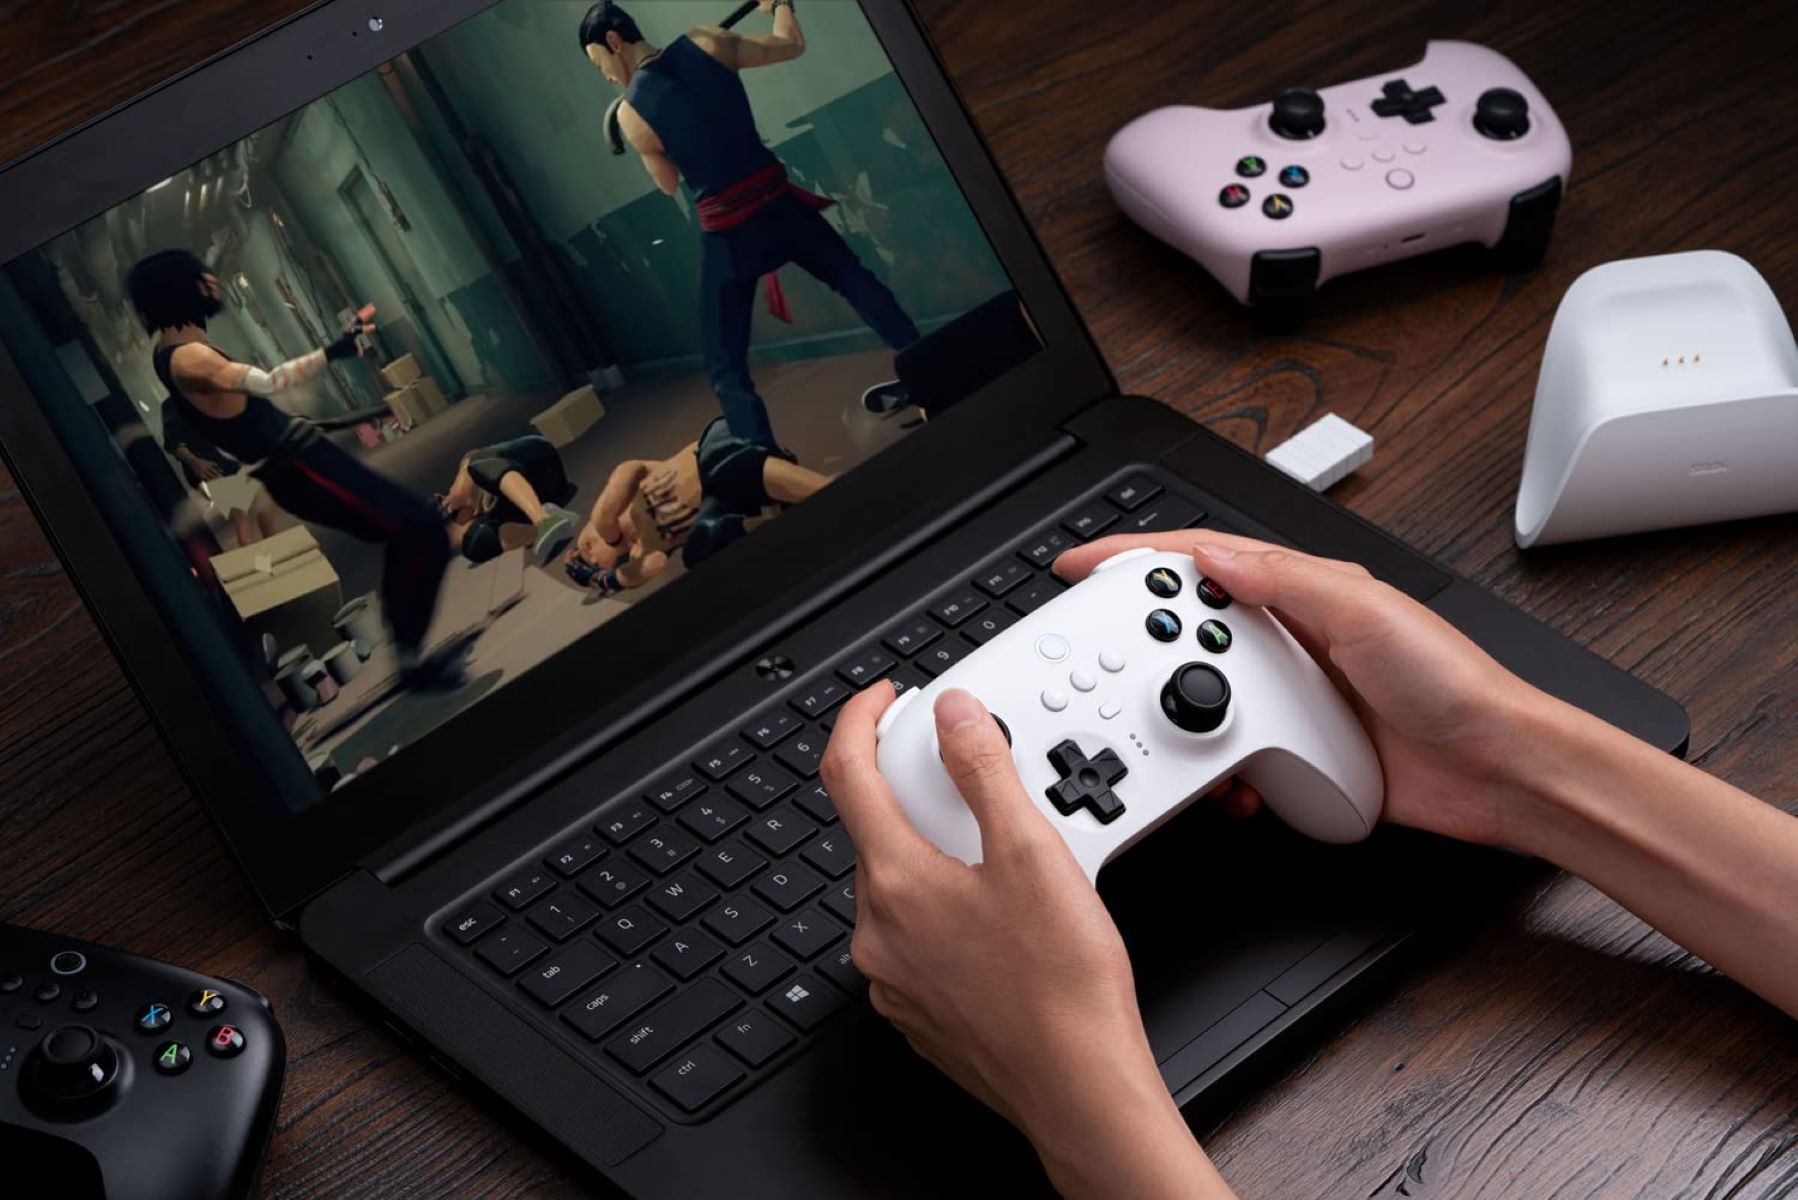 How To Install A USB Game Controller On Windows 10